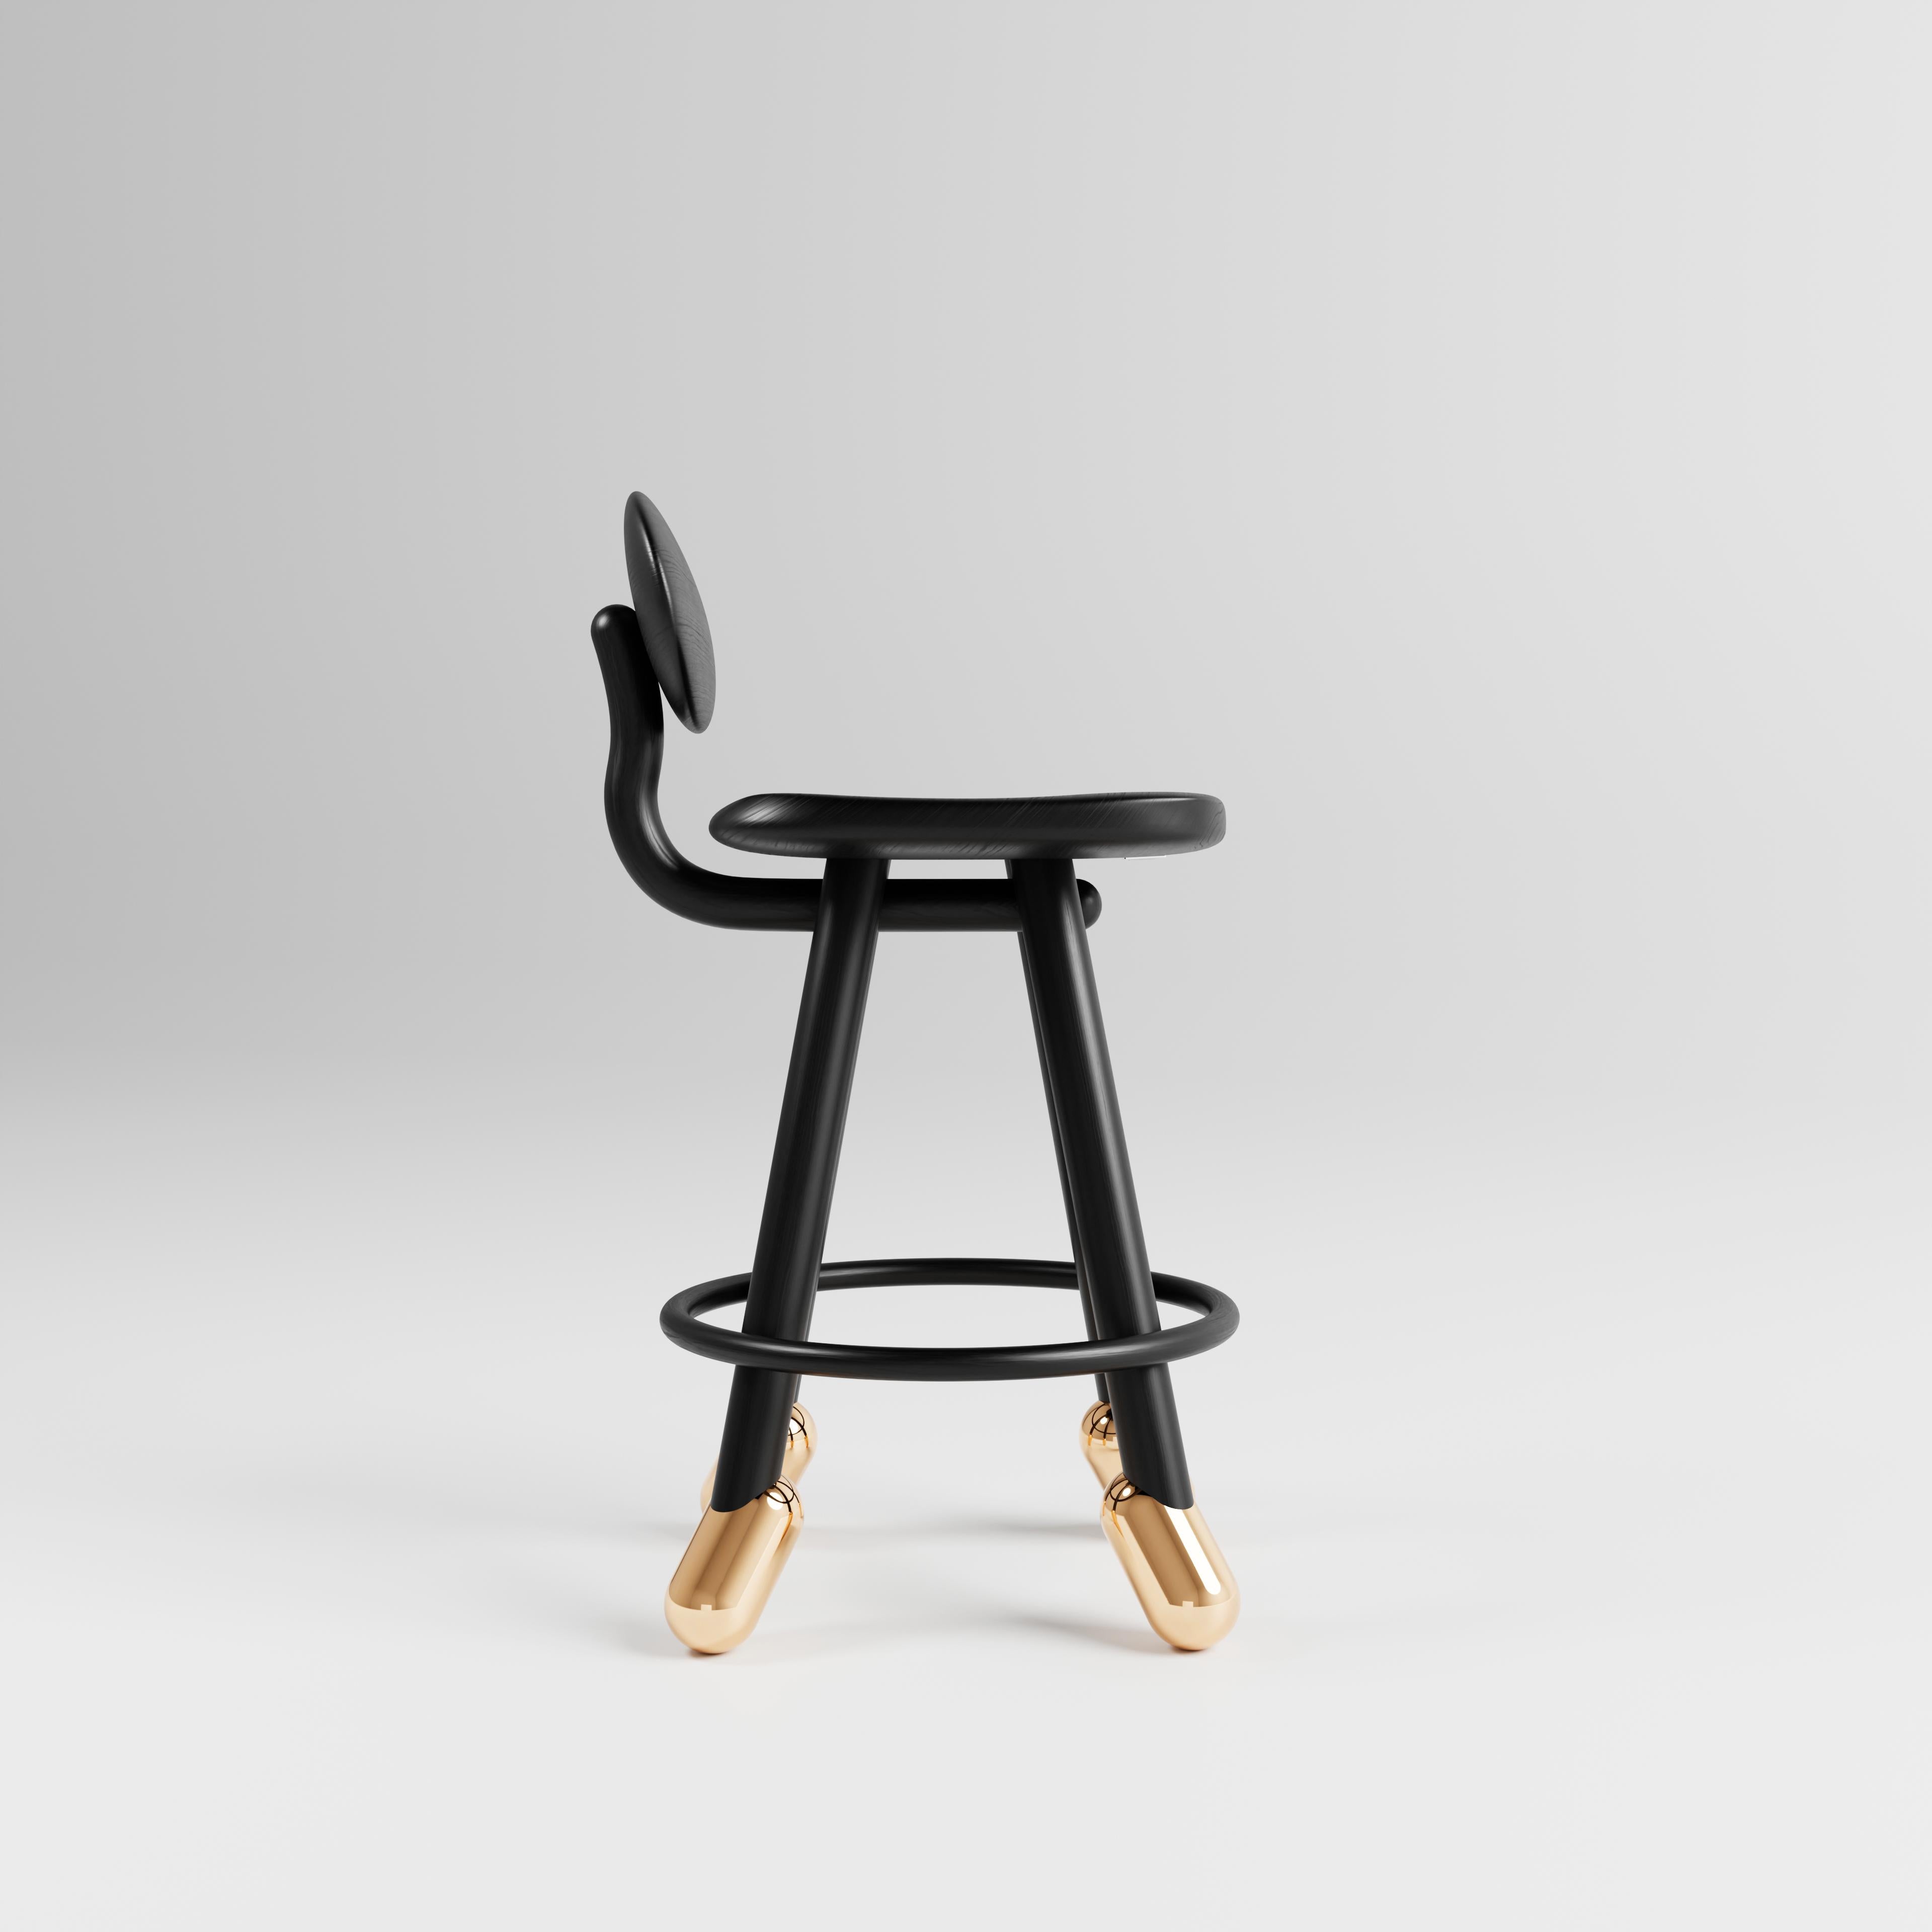 Tutu is not an ordinary stool. It was designed with a specific personality in mind, one that exudes elegance and grace. As a sister piece of the Walky Chair, Tutu was inspired by the figure of a ballerina.

We visualized that a stool that is tall